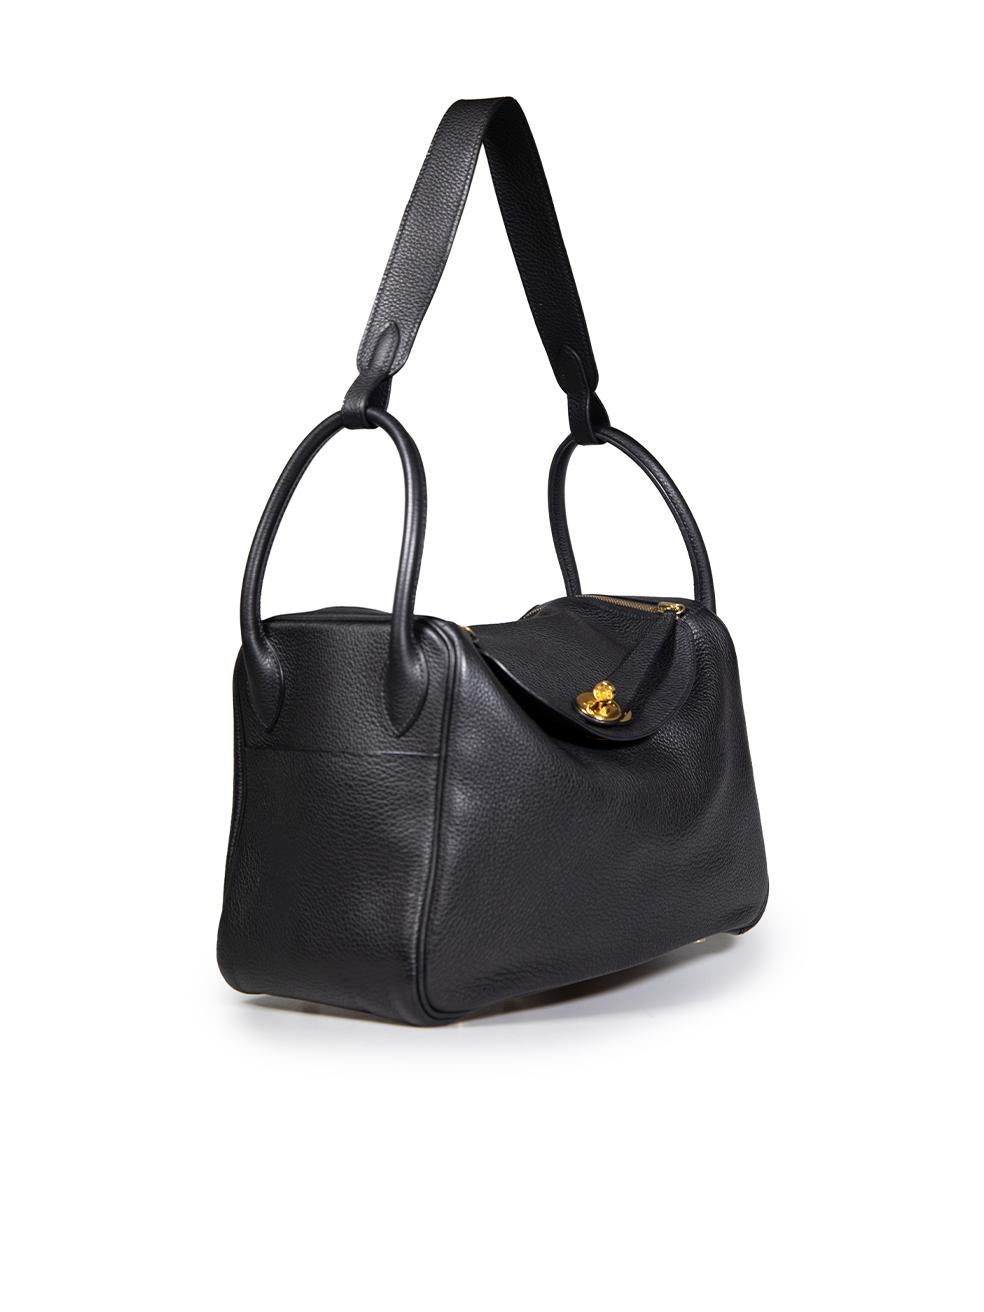 CONDITION is Very good. Minimal wear to bag is evident. Minimal wear to bottom feet with small scratches on this used Hermès designer resale item. This item comes with original dust bag.
 
 
 
 Details
 
 
 2007
 
 Lindy 26 model
 
 Noir
 
 Togo